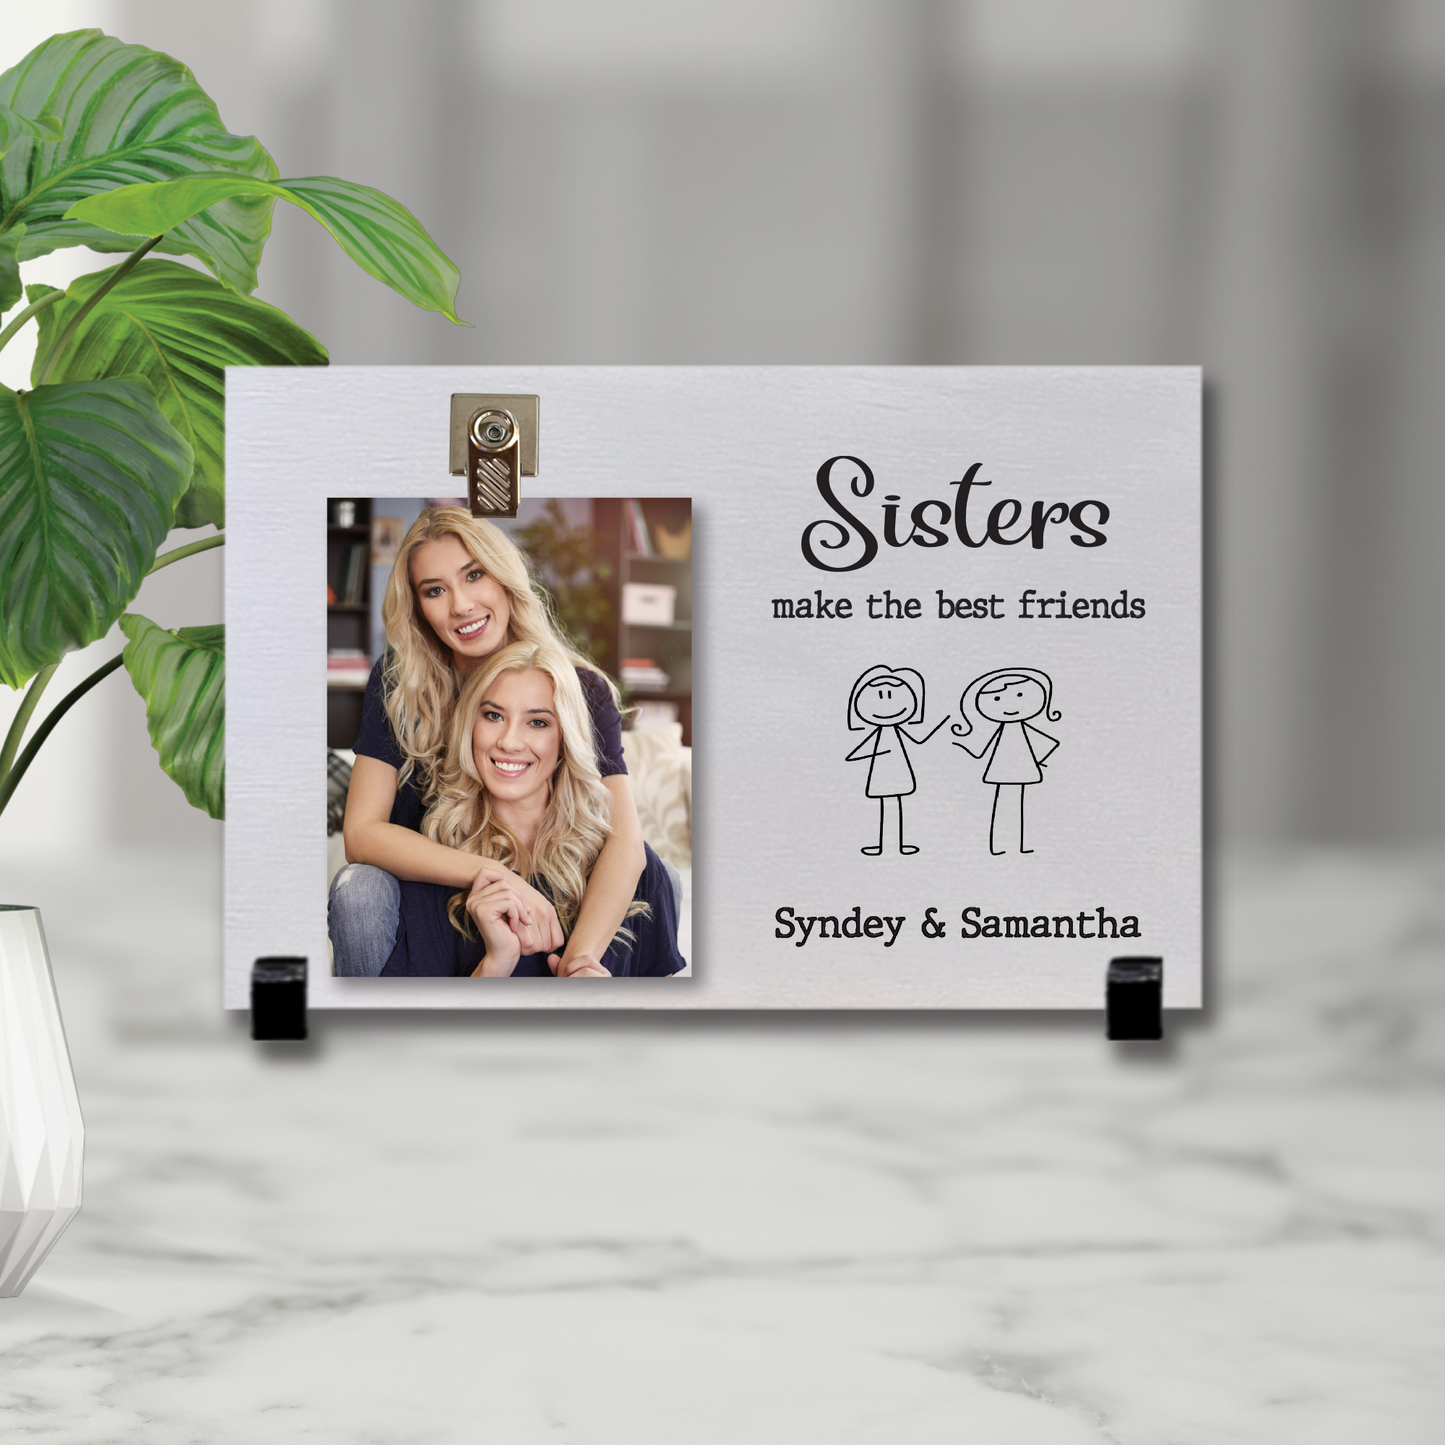 Customize your cherished moments with our Sister Personalized Picture Frame available at www.florida-funshine.com. Create a heartfelt gift for family and friends with free personalization, quick shipping in 1-2 business days, and quality crafted picture frames, portraits, and plaques made in the USA."